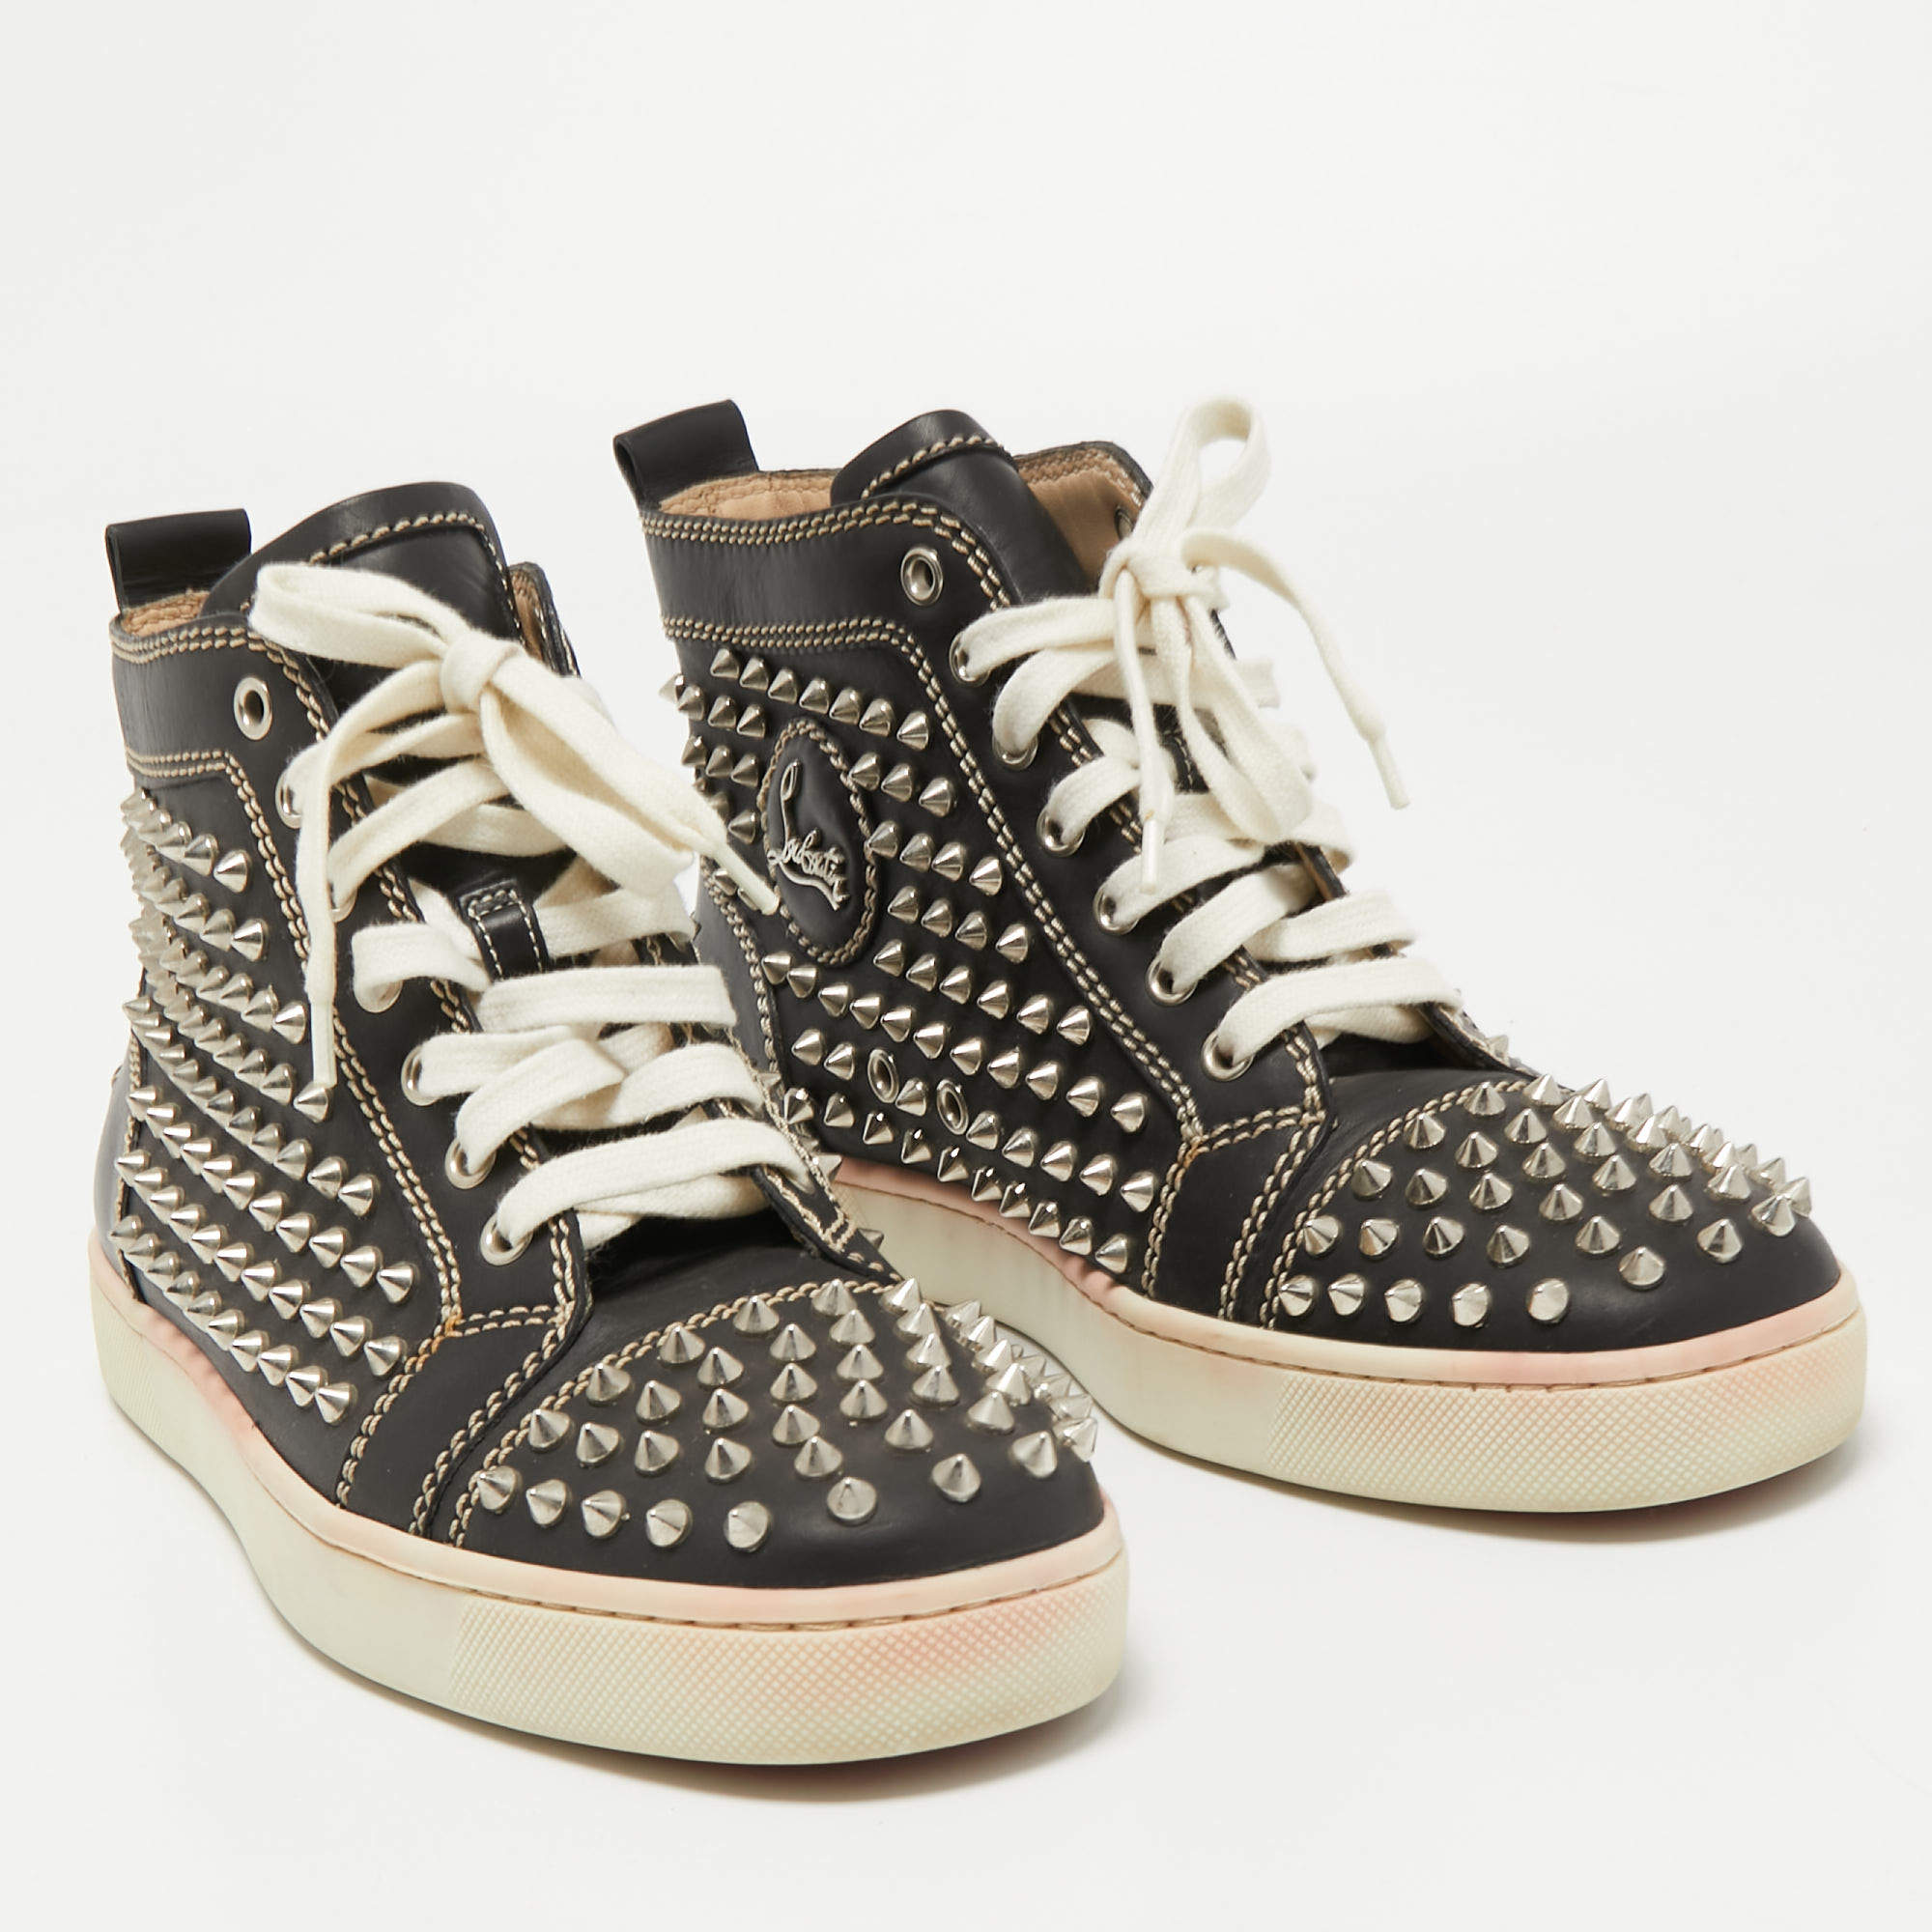 Christian Louboutin Louis Spikes Flat High Top Sneakers Black Leather 40  AUTH